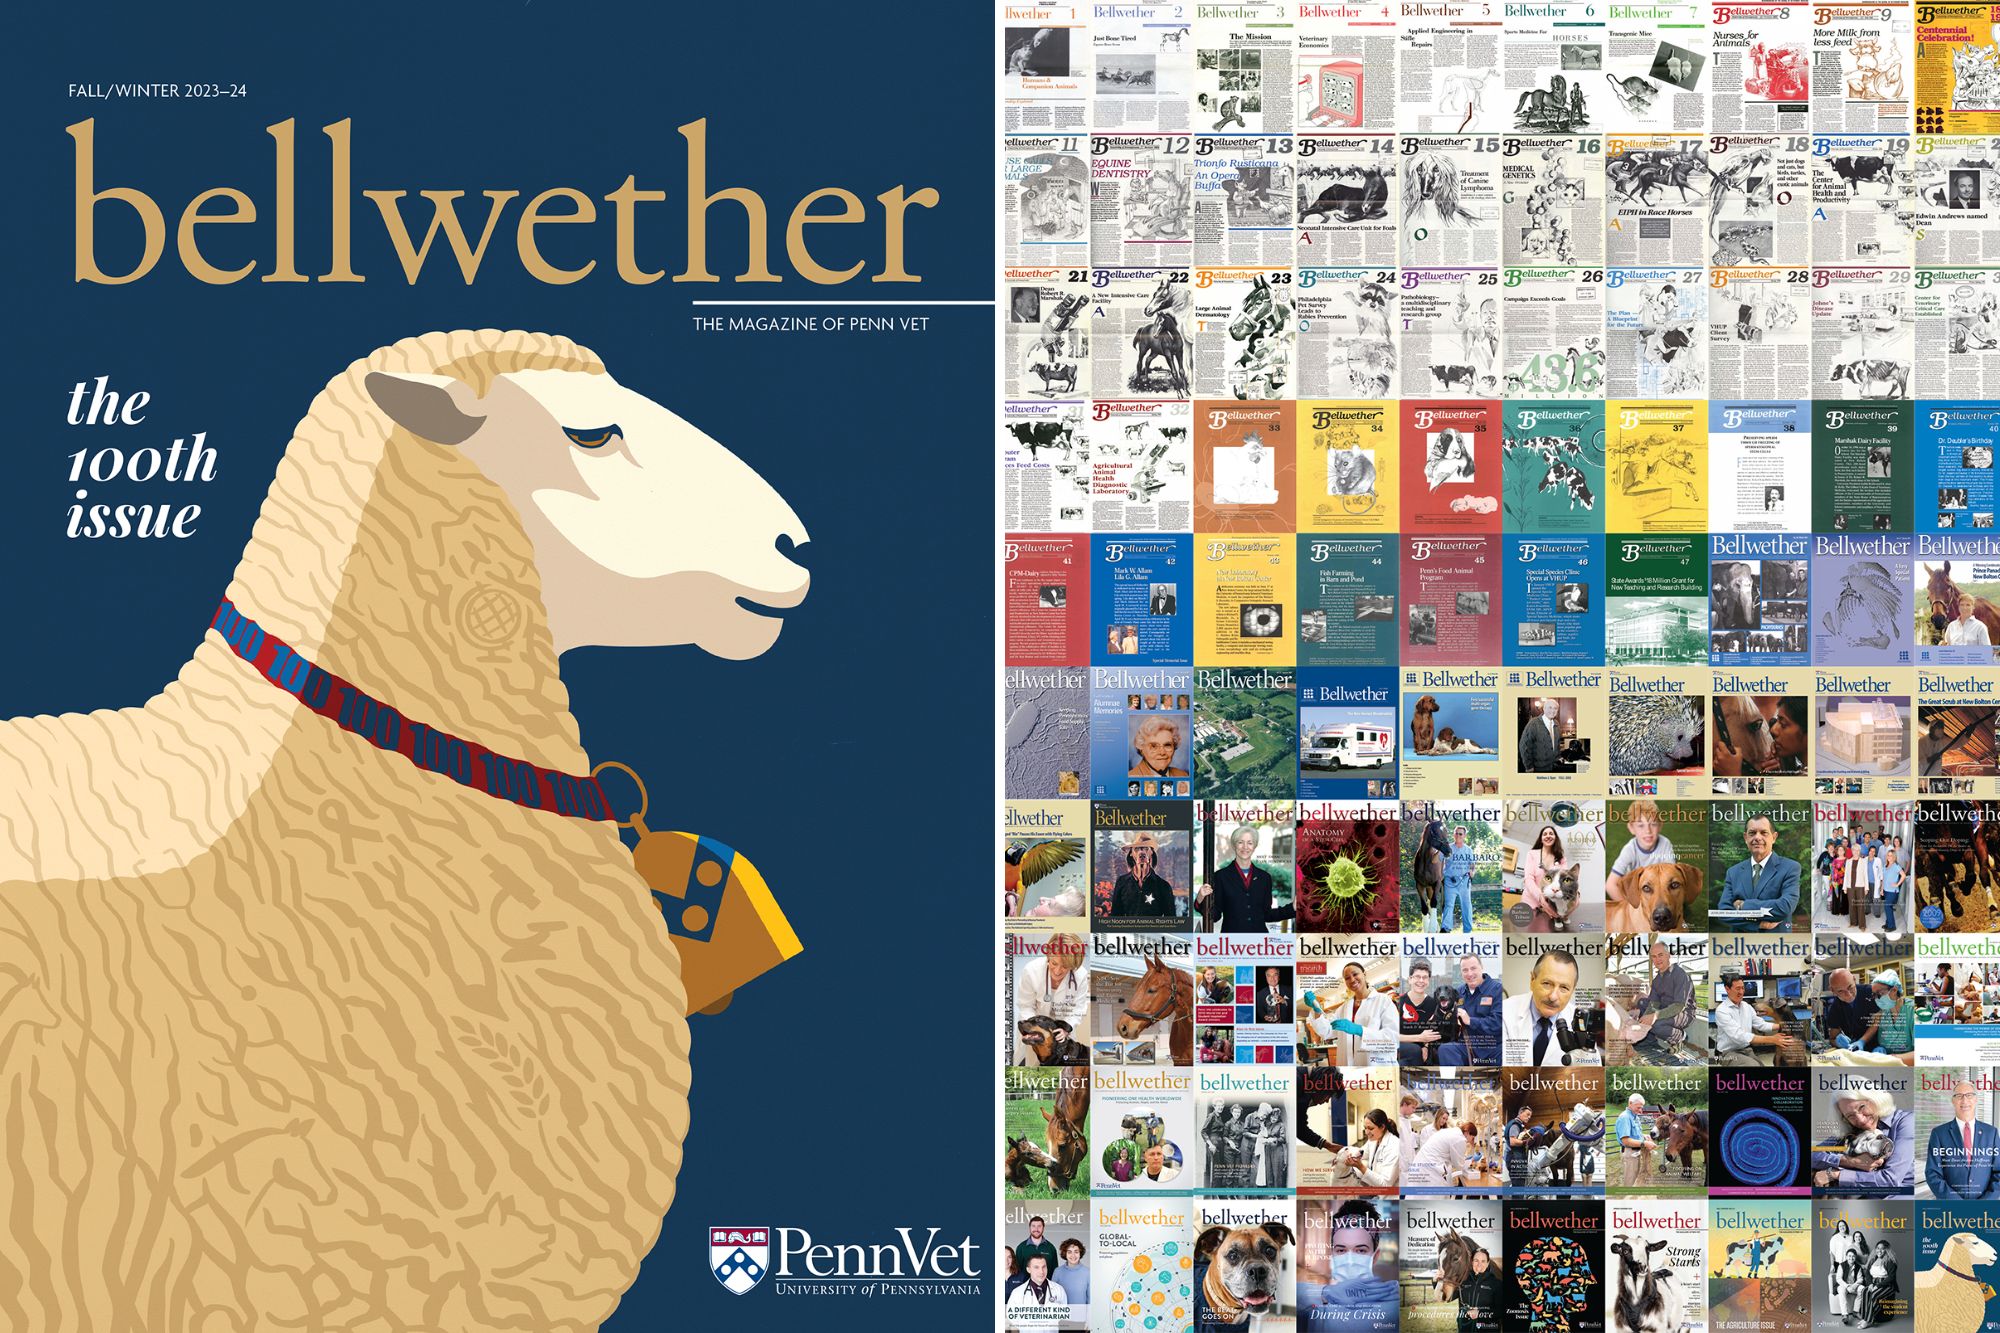 Left: Cover of Bellwether magazine with an illustration of a sheep; right: a mosaic of 100 Bellwether magazine covers.